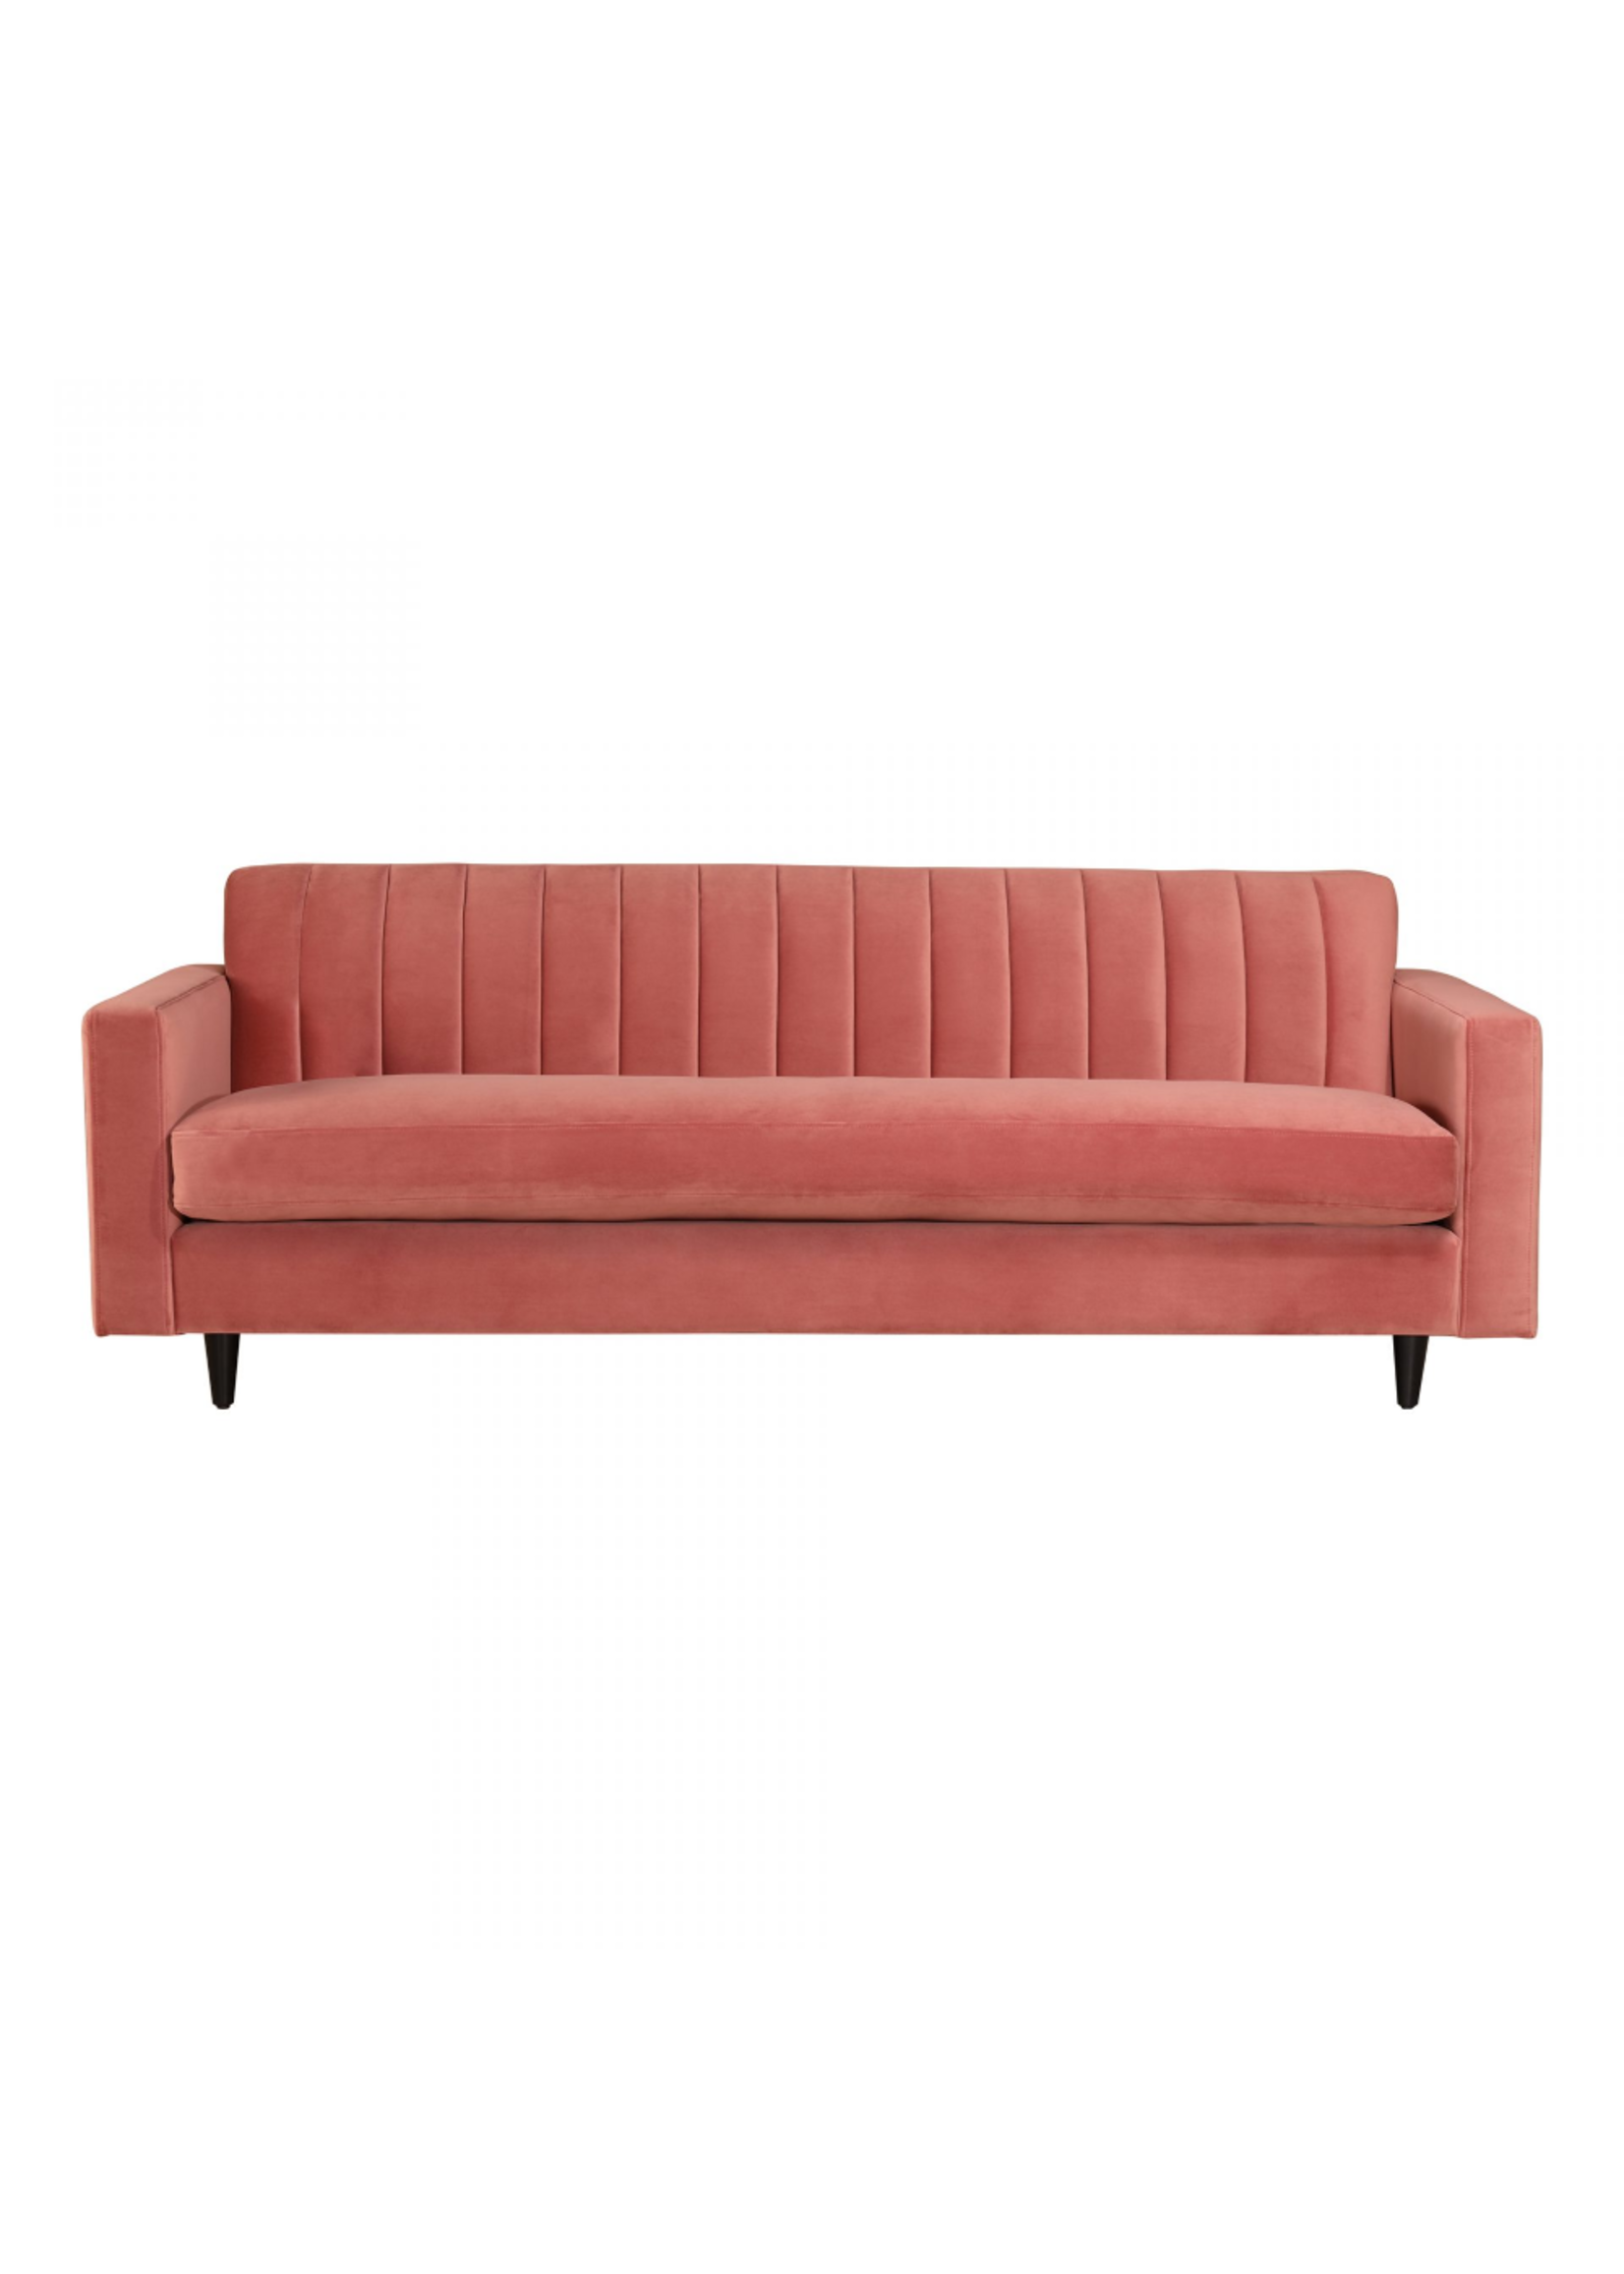 Moes Home Collection Primavera Sofa Cherry Blossom by MOES